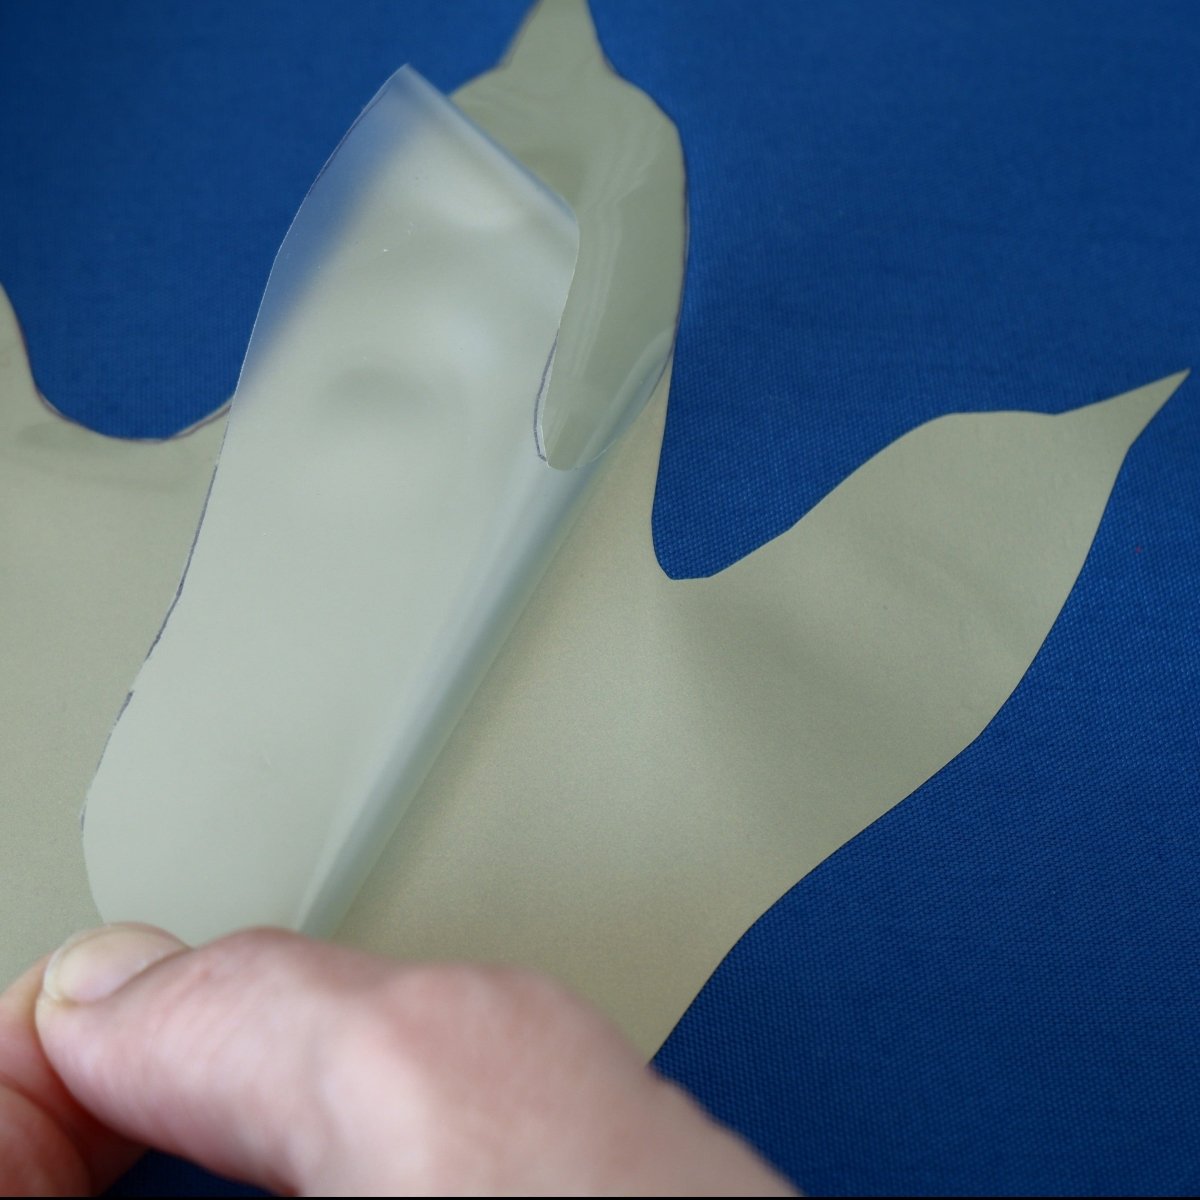 Peeling protective layer off of a pressed on Heat Transfer Vinyl shape